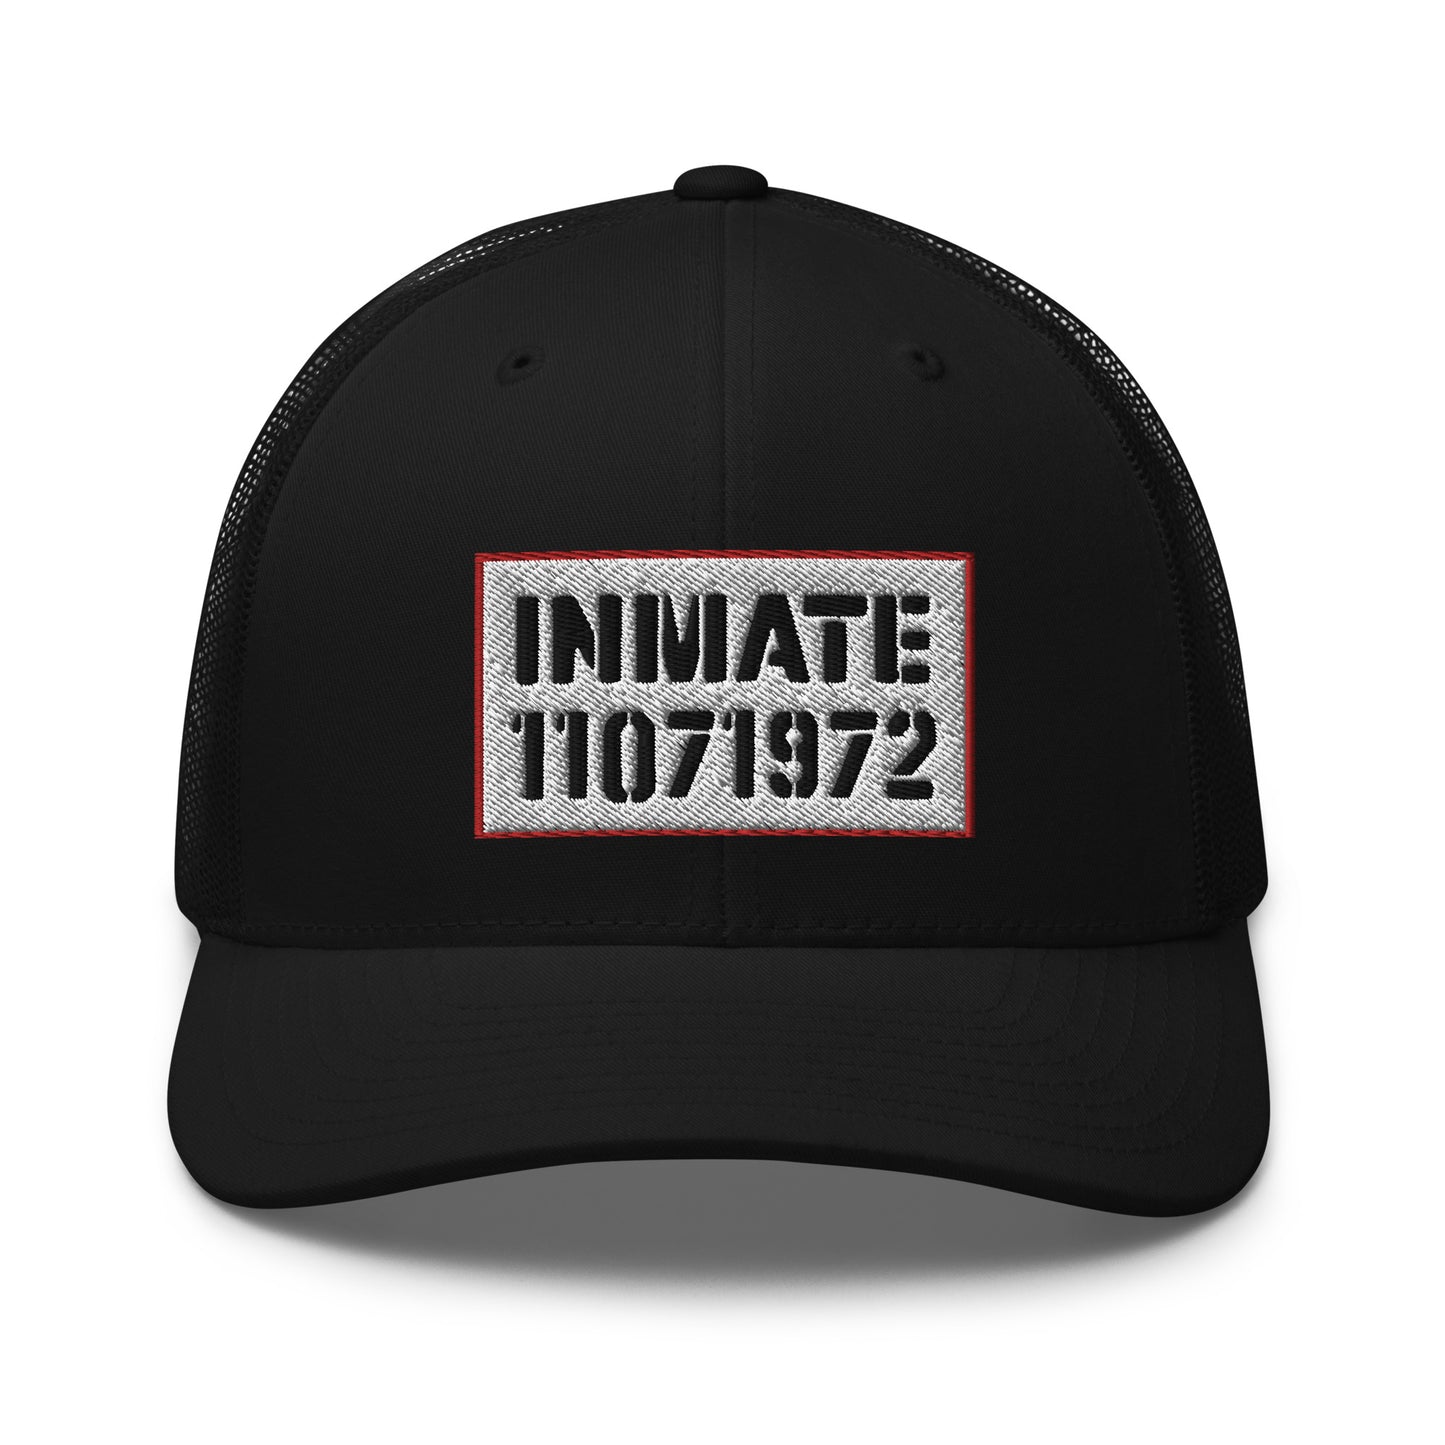 6-panel black cap with the word 'inmate' along with an inmate number embroidered on the front